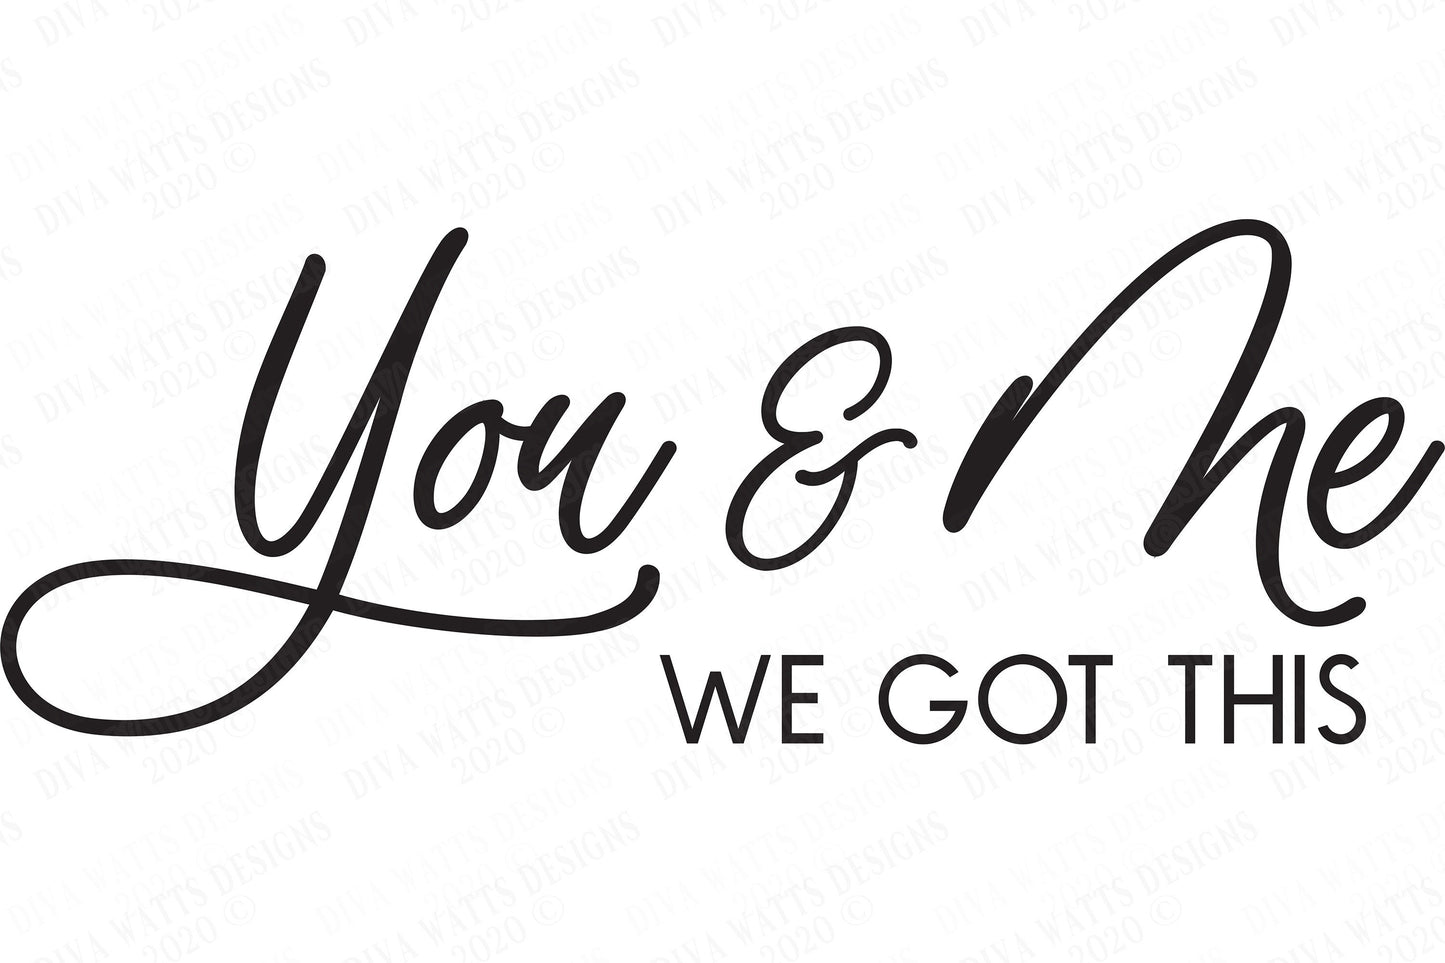 SVG | You & Me We Got This | Cutting File | Farmhouse Rustic Bedroom Home Sign | Couple Love | Wedding Anniversary | Vinyl Stencil HTV | DXF